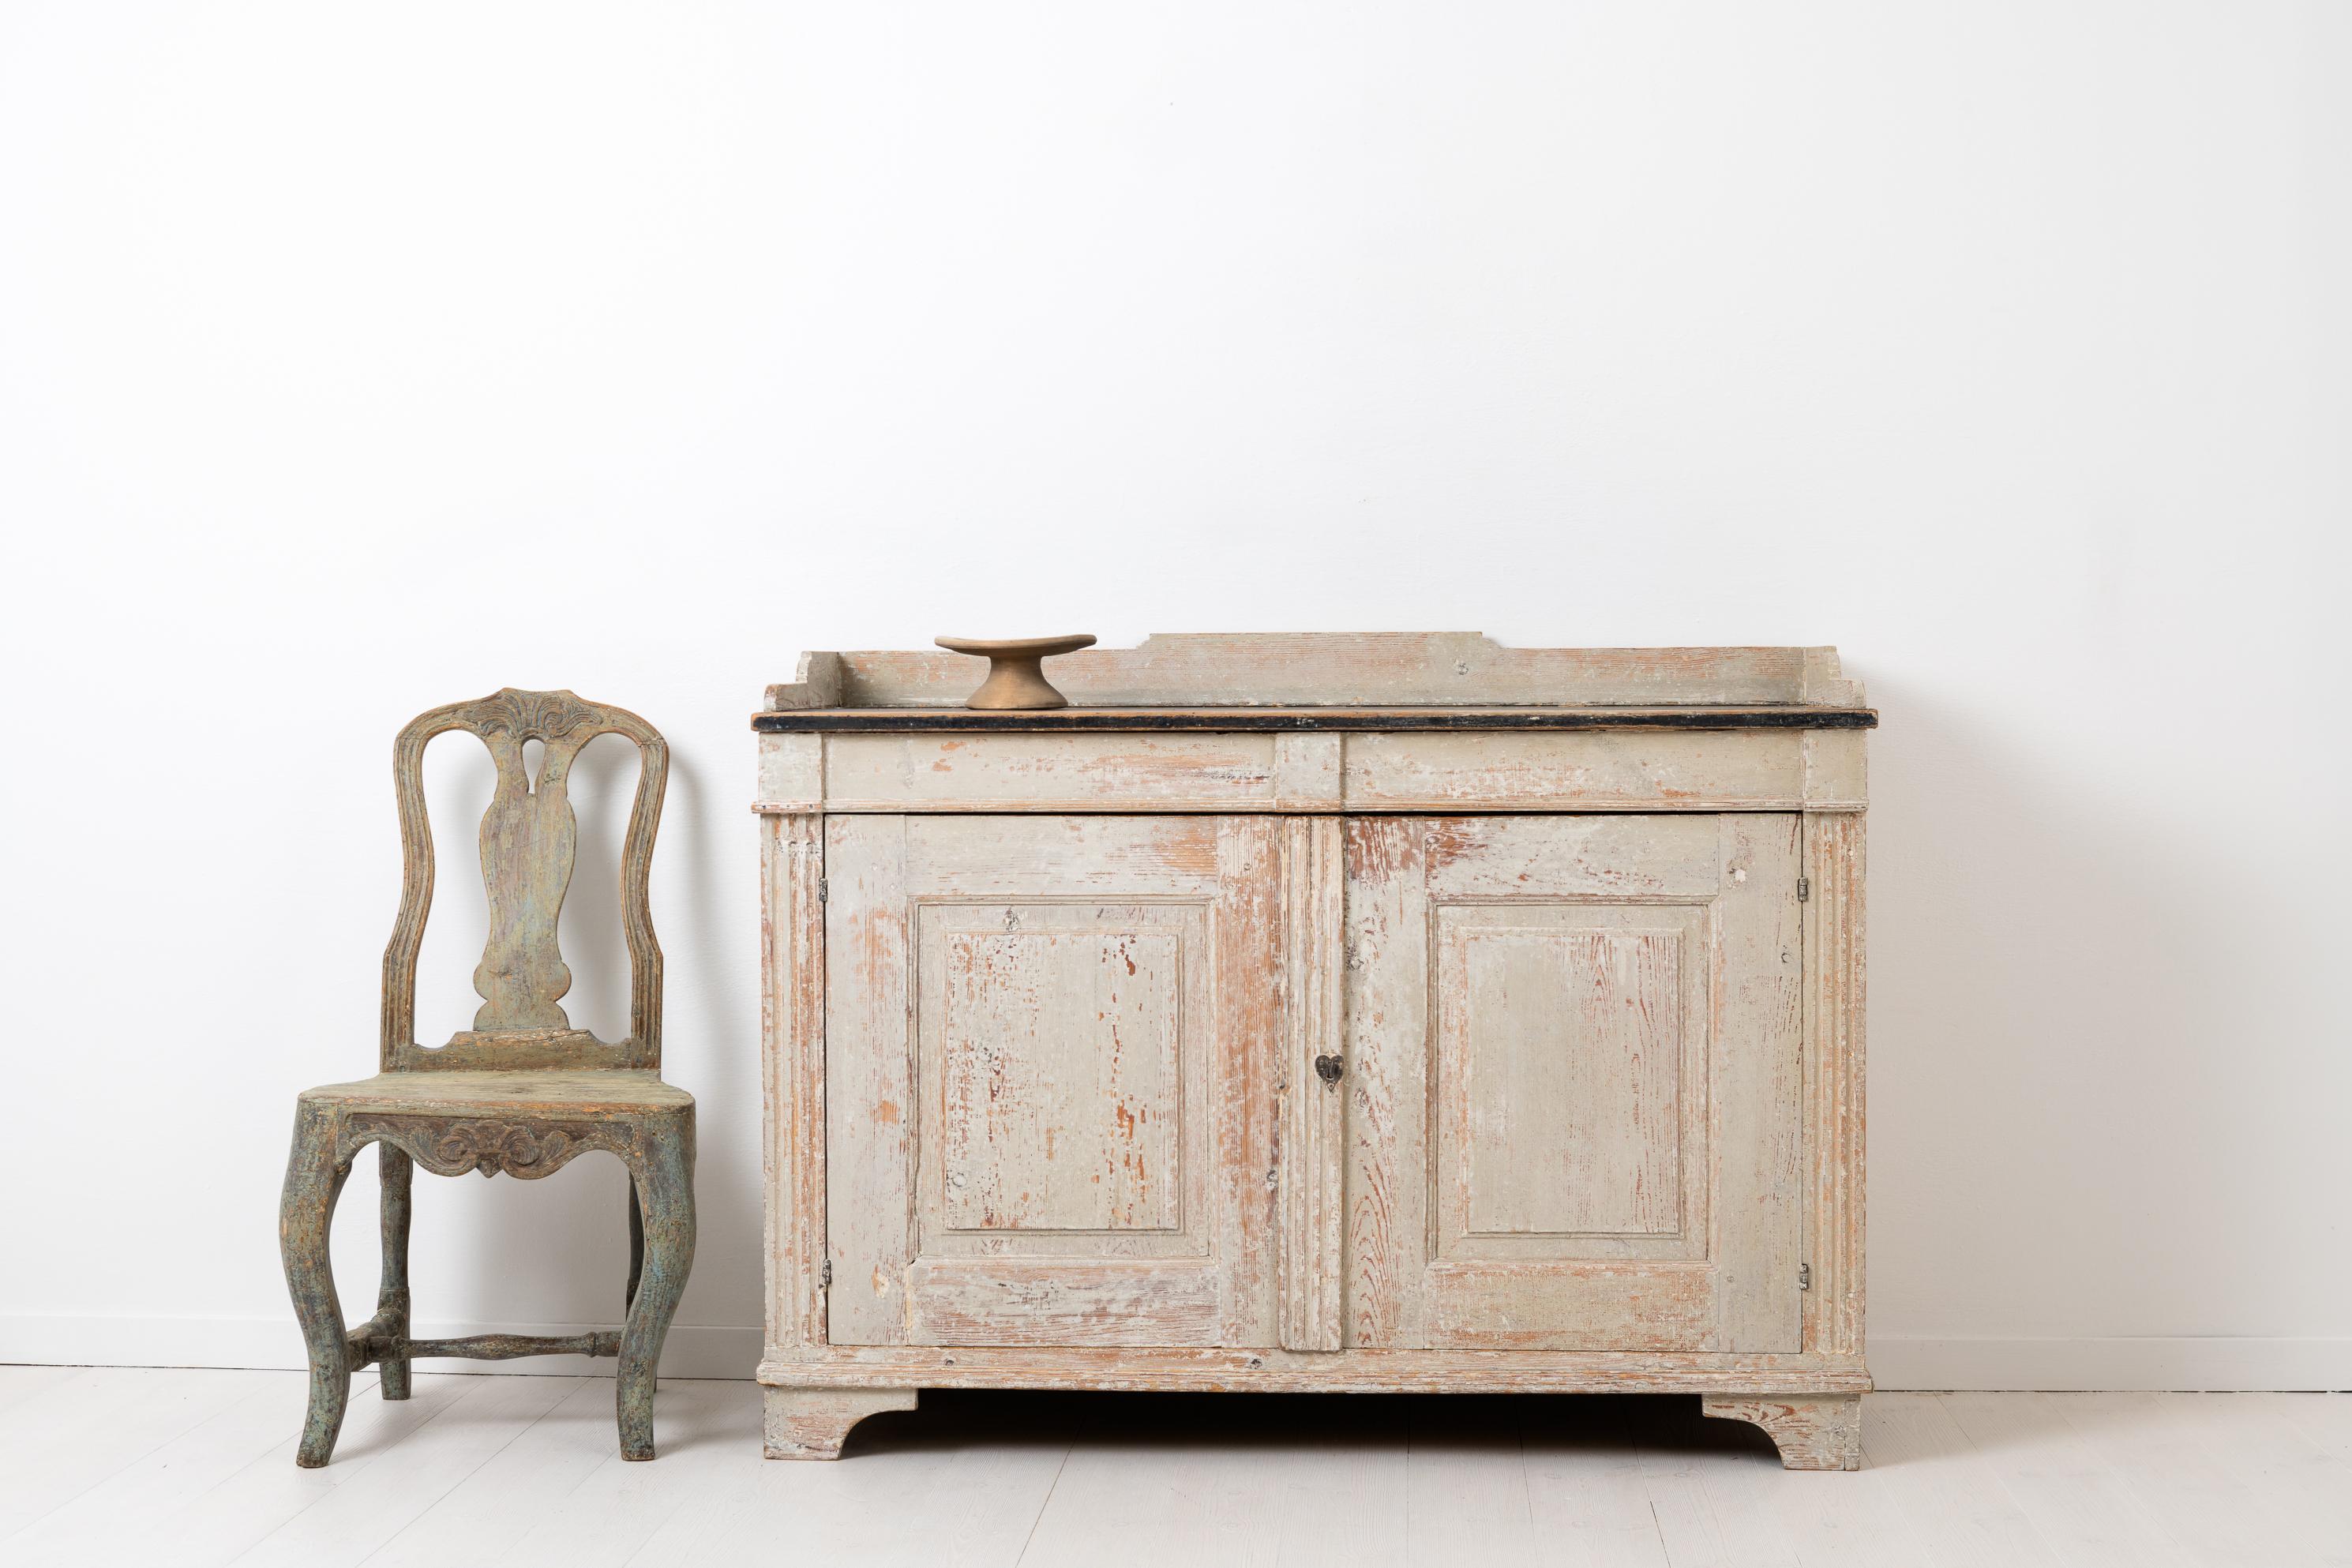 White Gustavian sideboard made during the last years of the 1700s. Made in the Gustavian style, otherwise known as the neoclassical style, which got its name from the Swedish king Gustav III during the late 1700s. The sideboard is painted pine with